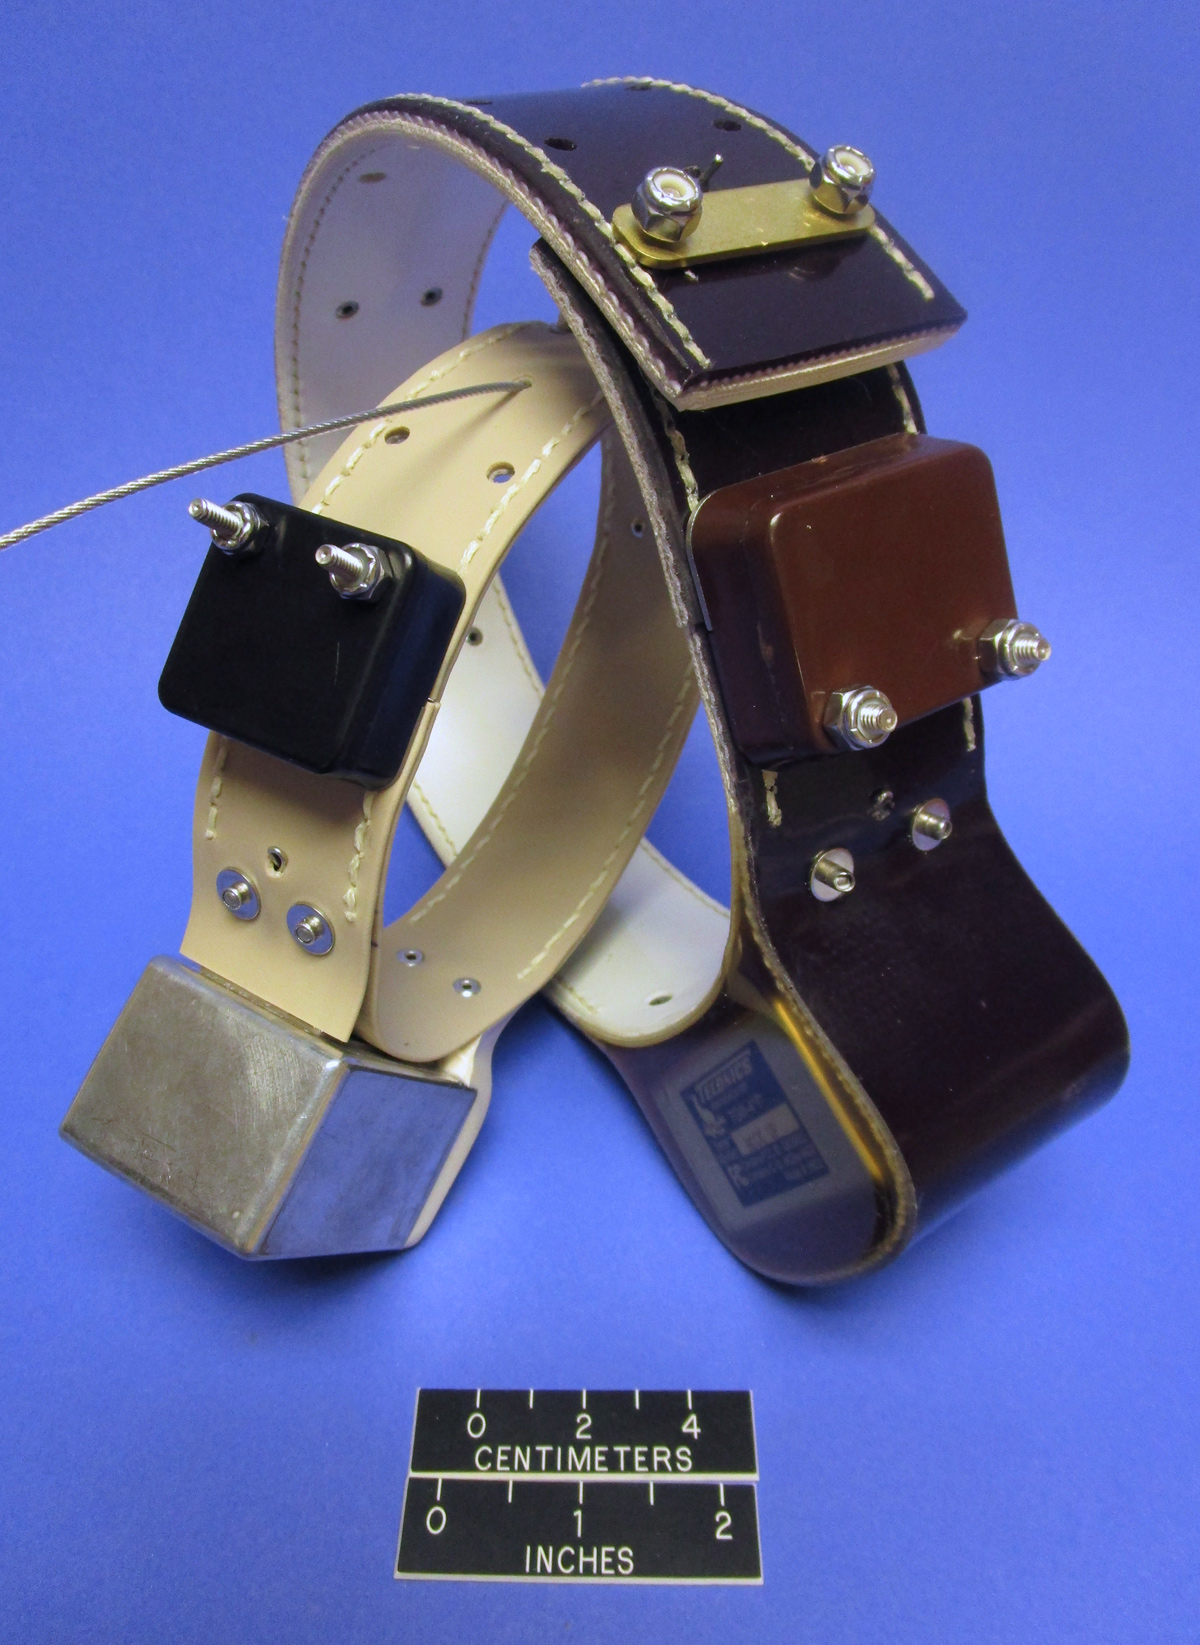 CR-7 on 1.5" collar (left) and CR-5 release on 2" collar (right)